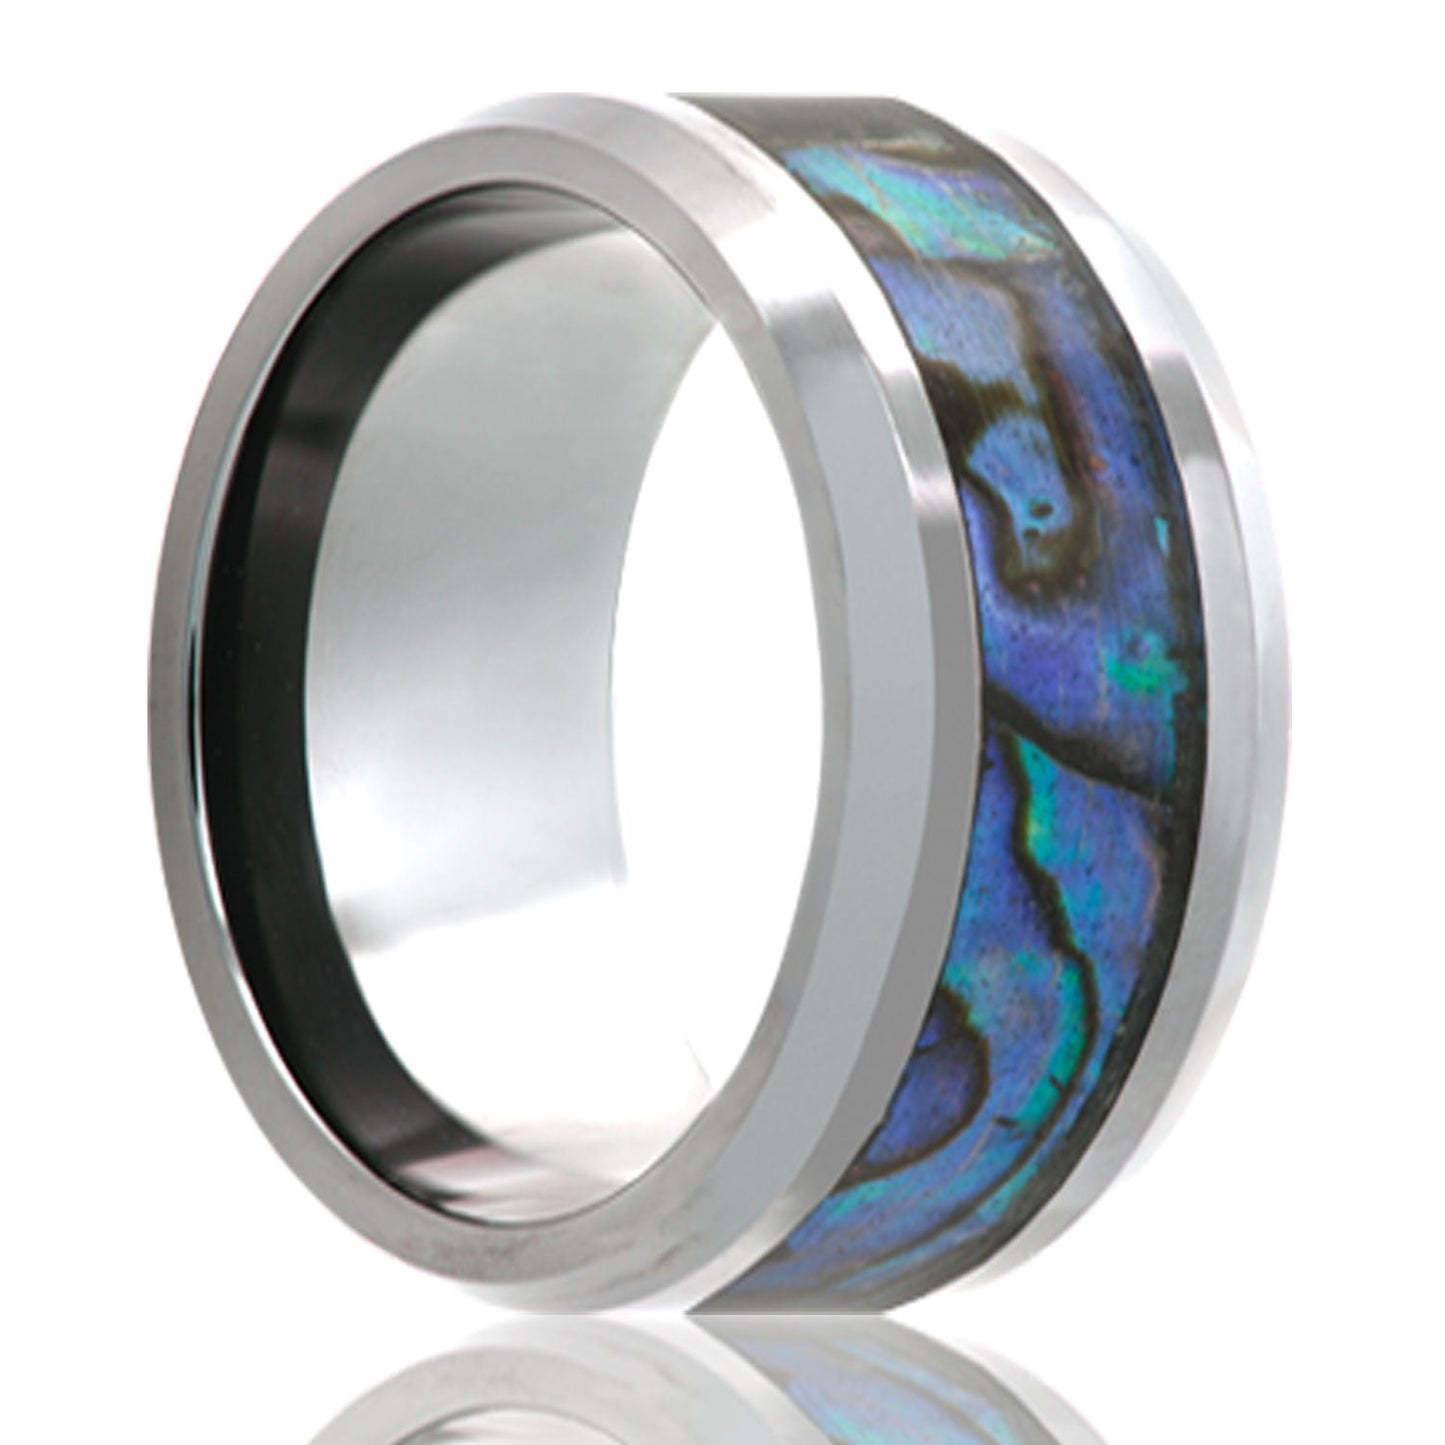 Abalone Inlay Tungsten Wedding Band with Beveled Edges